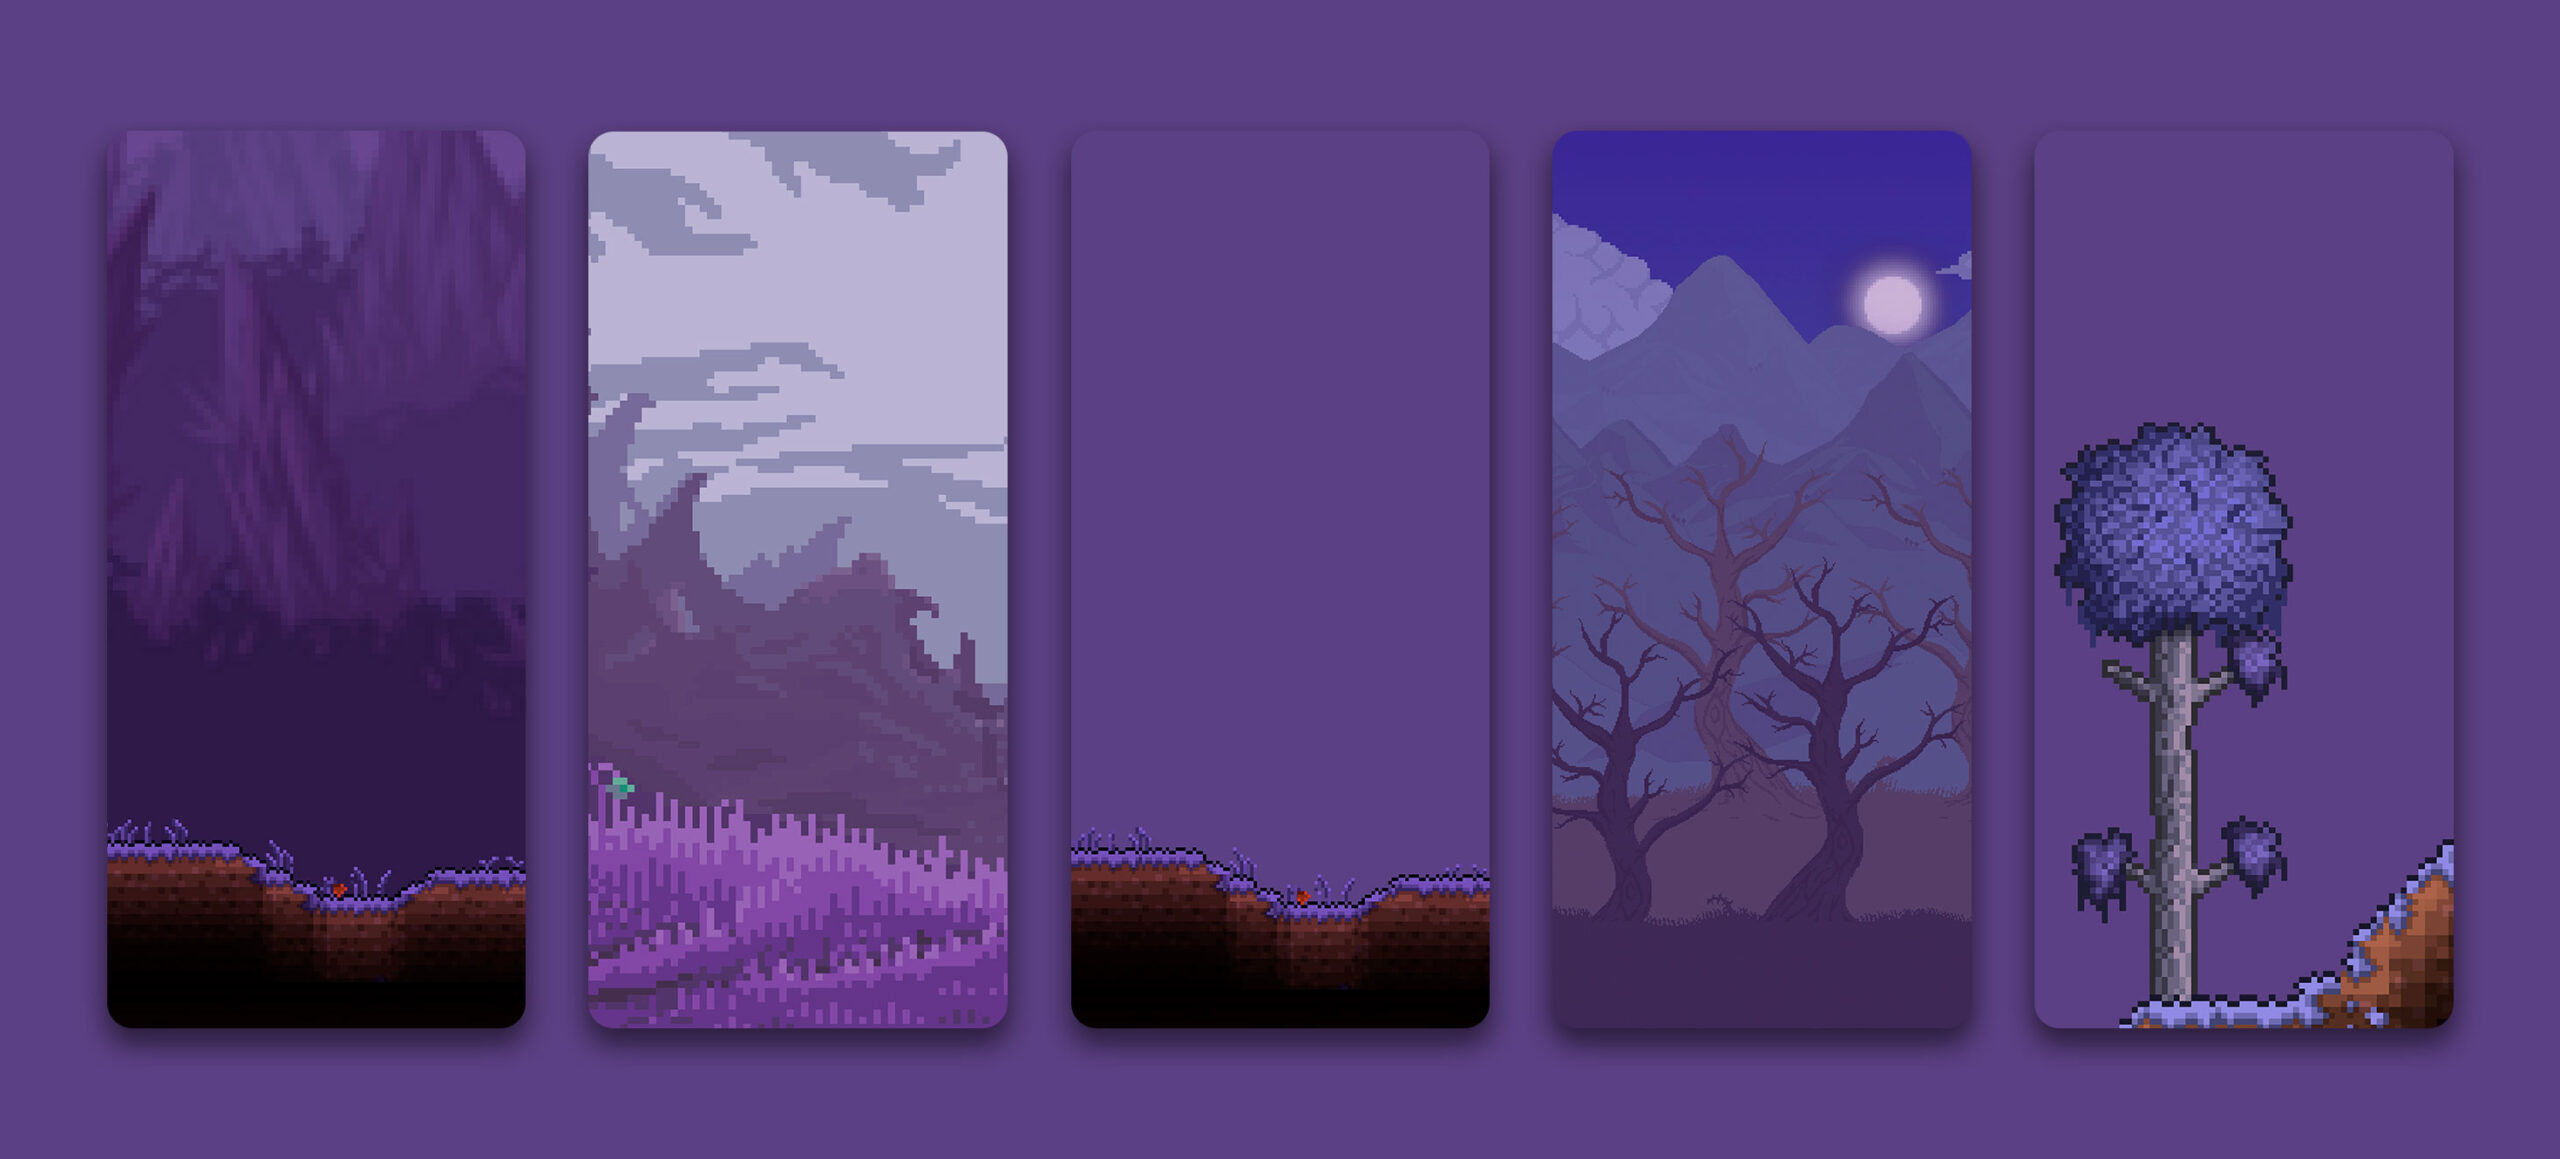 terraria app icons pack preview 6